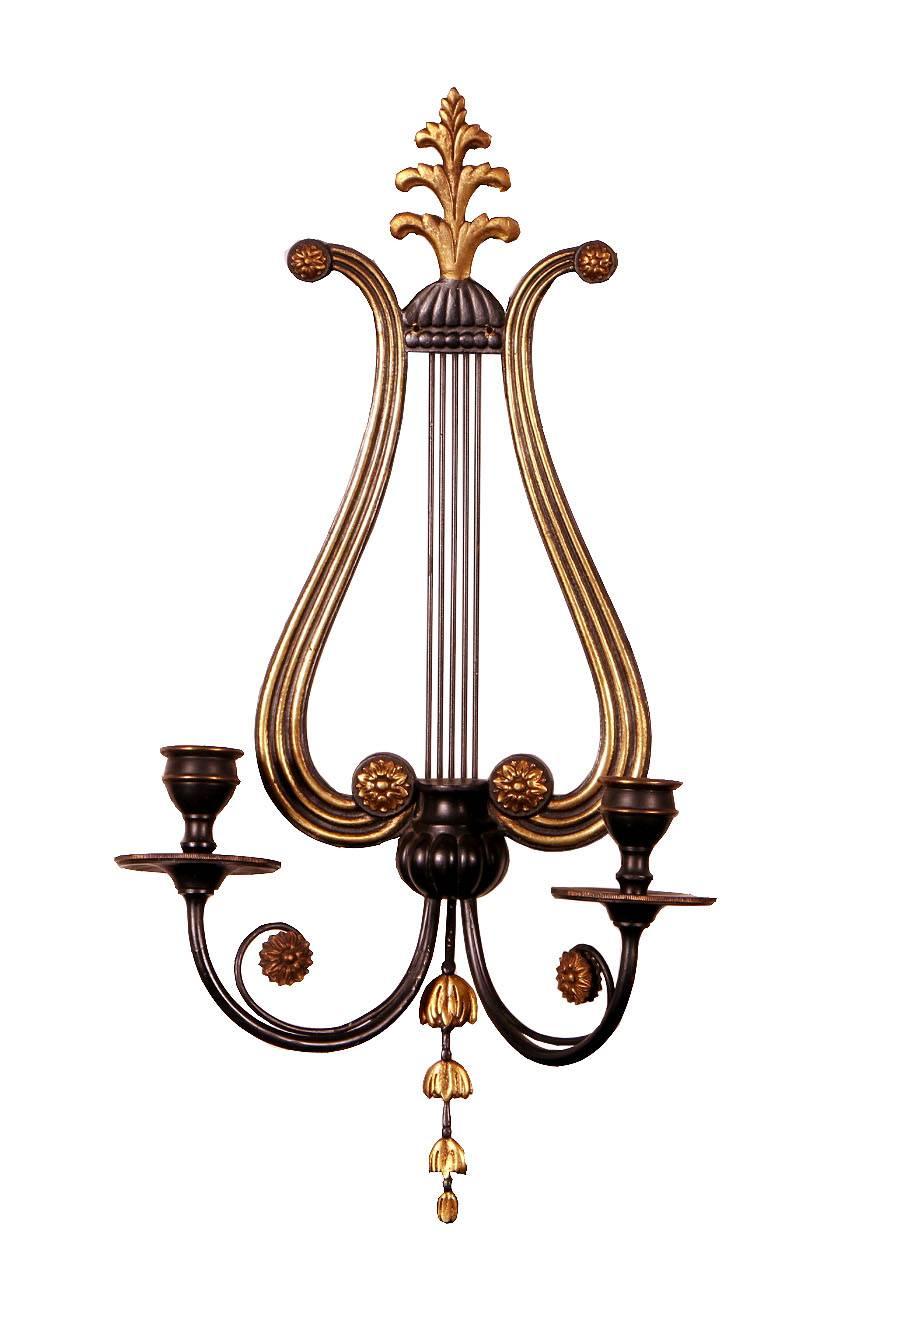 A lovely pair of neoclassical European black lacquer painted brass wall-mounted lights with harp-shaped back featuring rosettes, fluted sides, and acanthus finials. A beautifully sinuous Adamesque design. France, circa 1940.